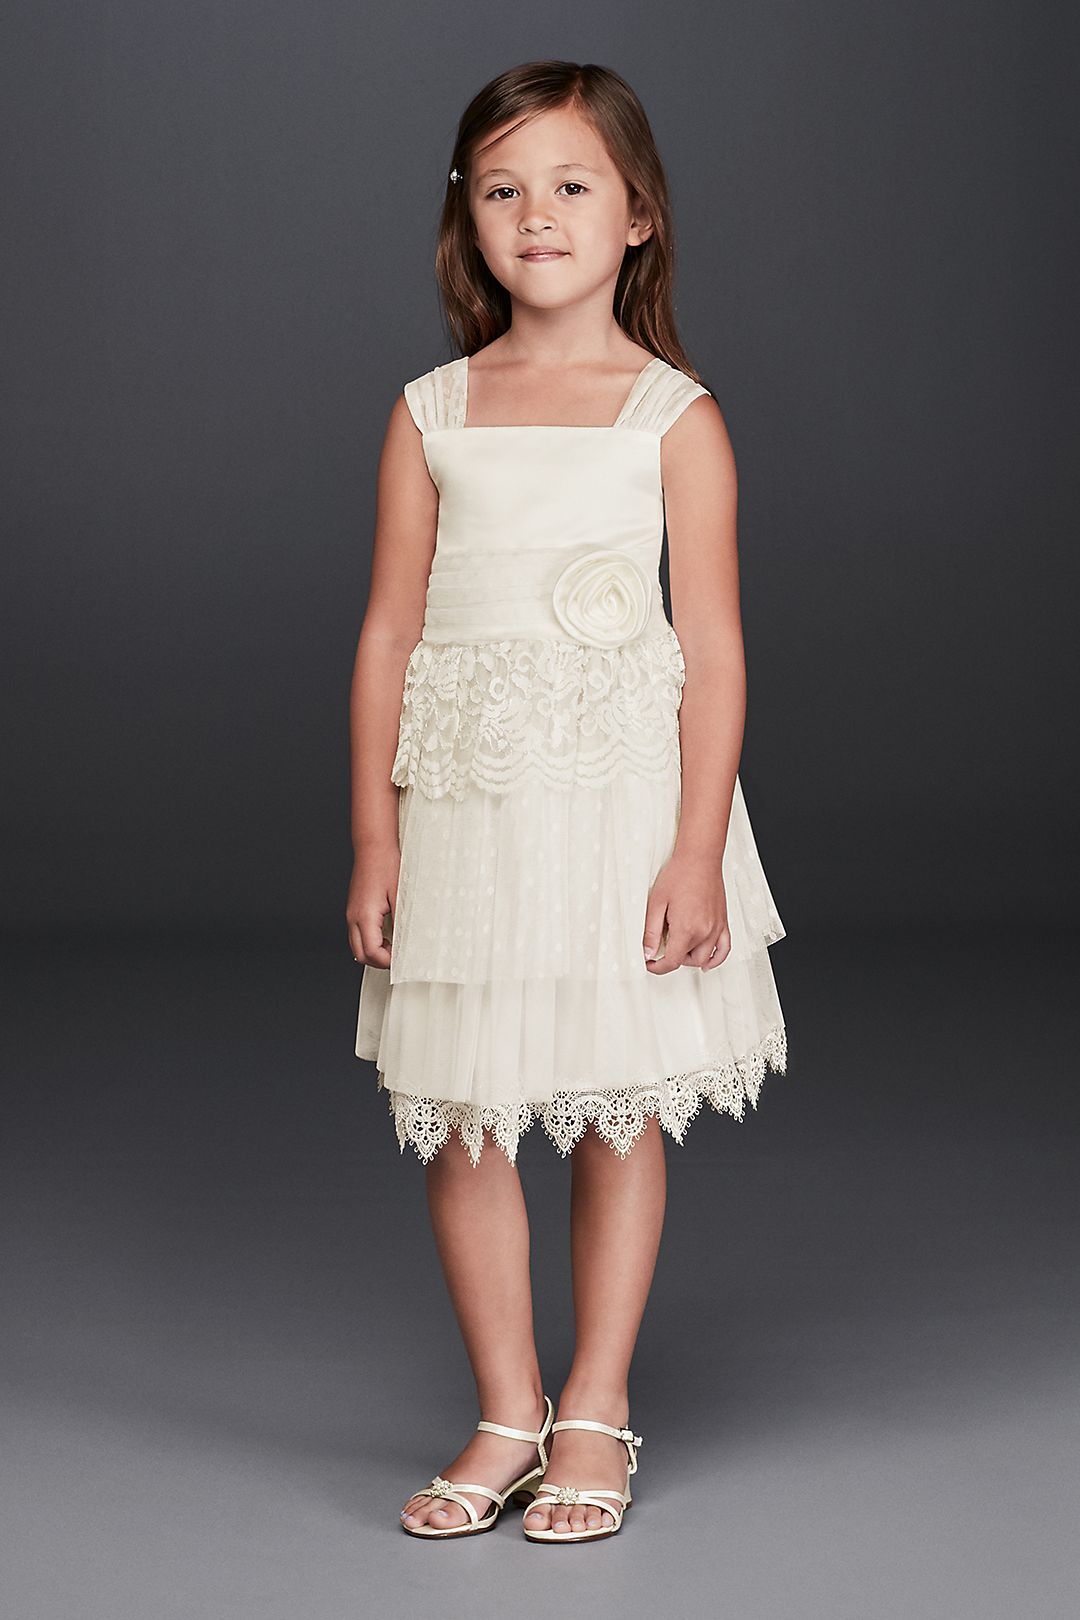 Lace Flower Girl Dress with Rosette Detail Image 1